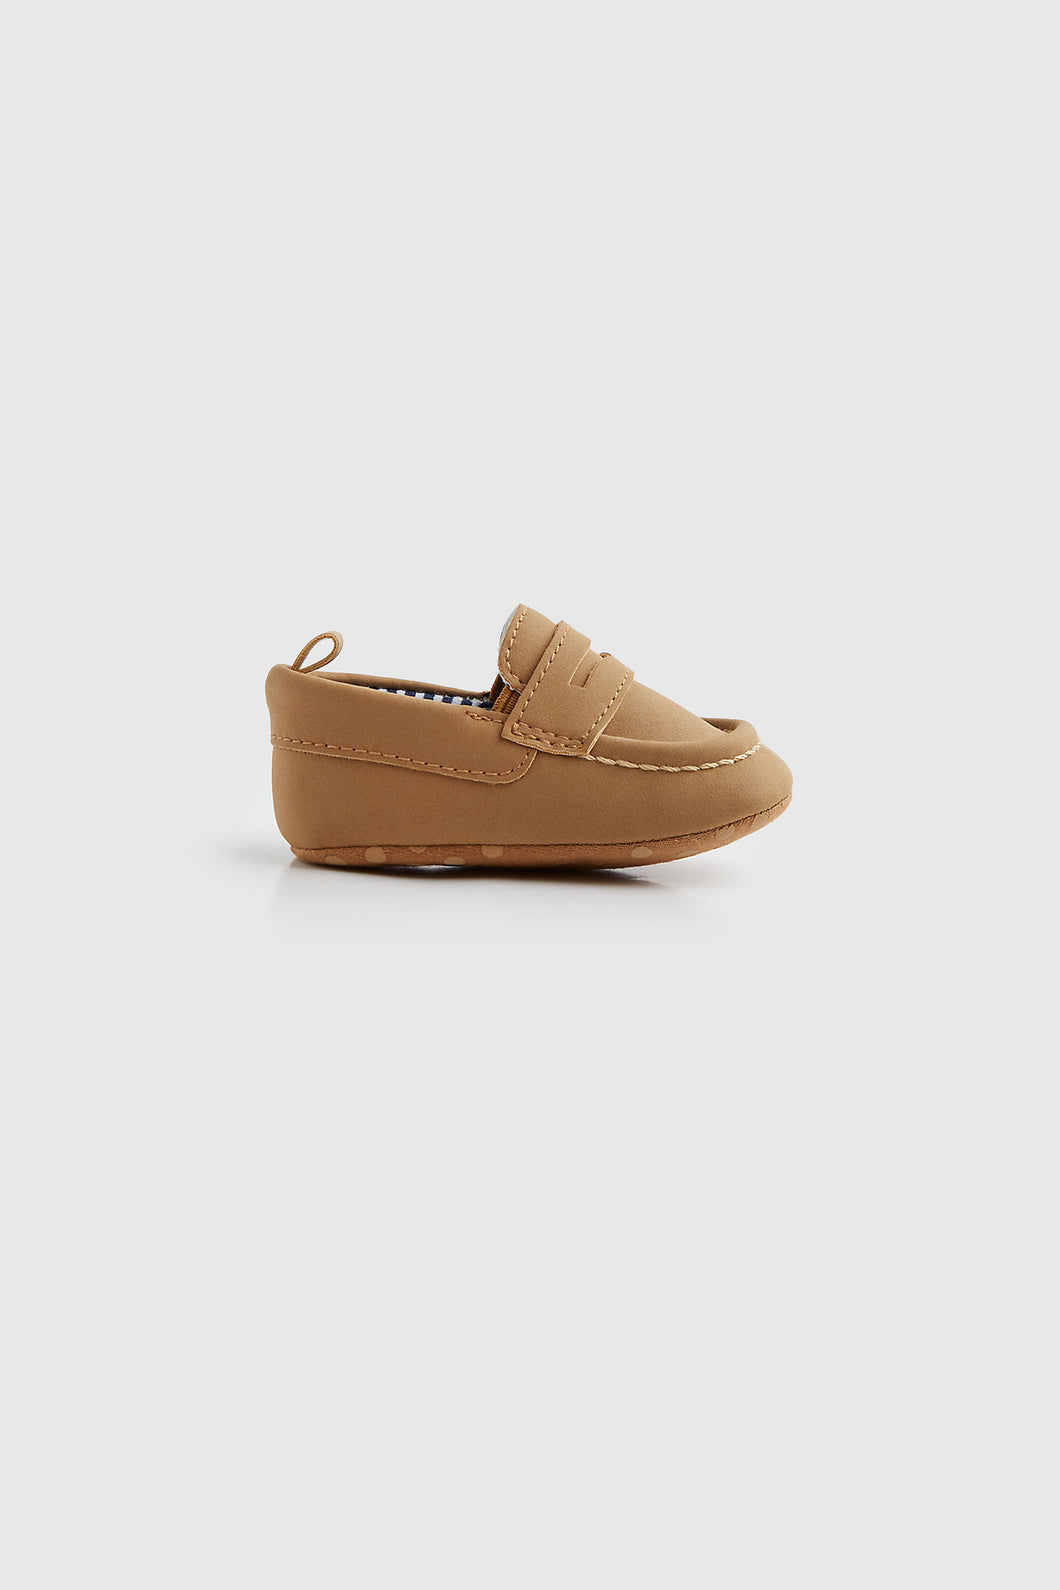 Mothercare Brown Loafer Pram Shoes